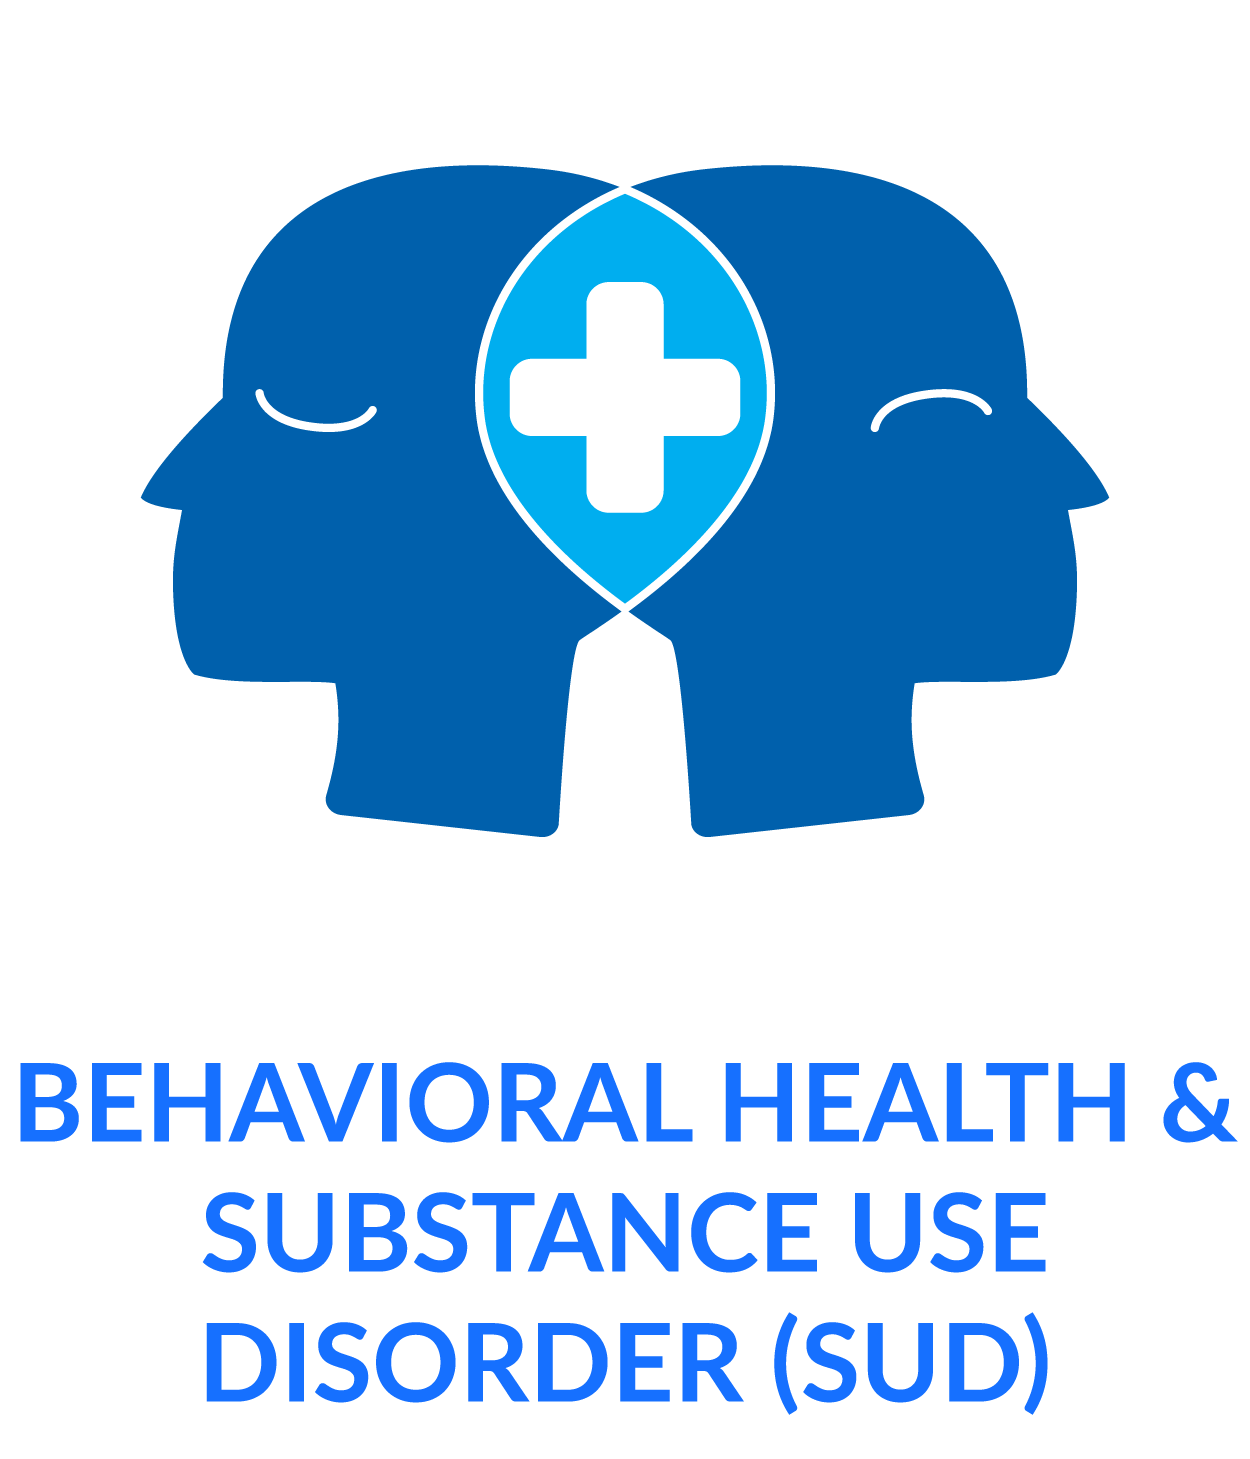 Behavioral Health and substance use disorder